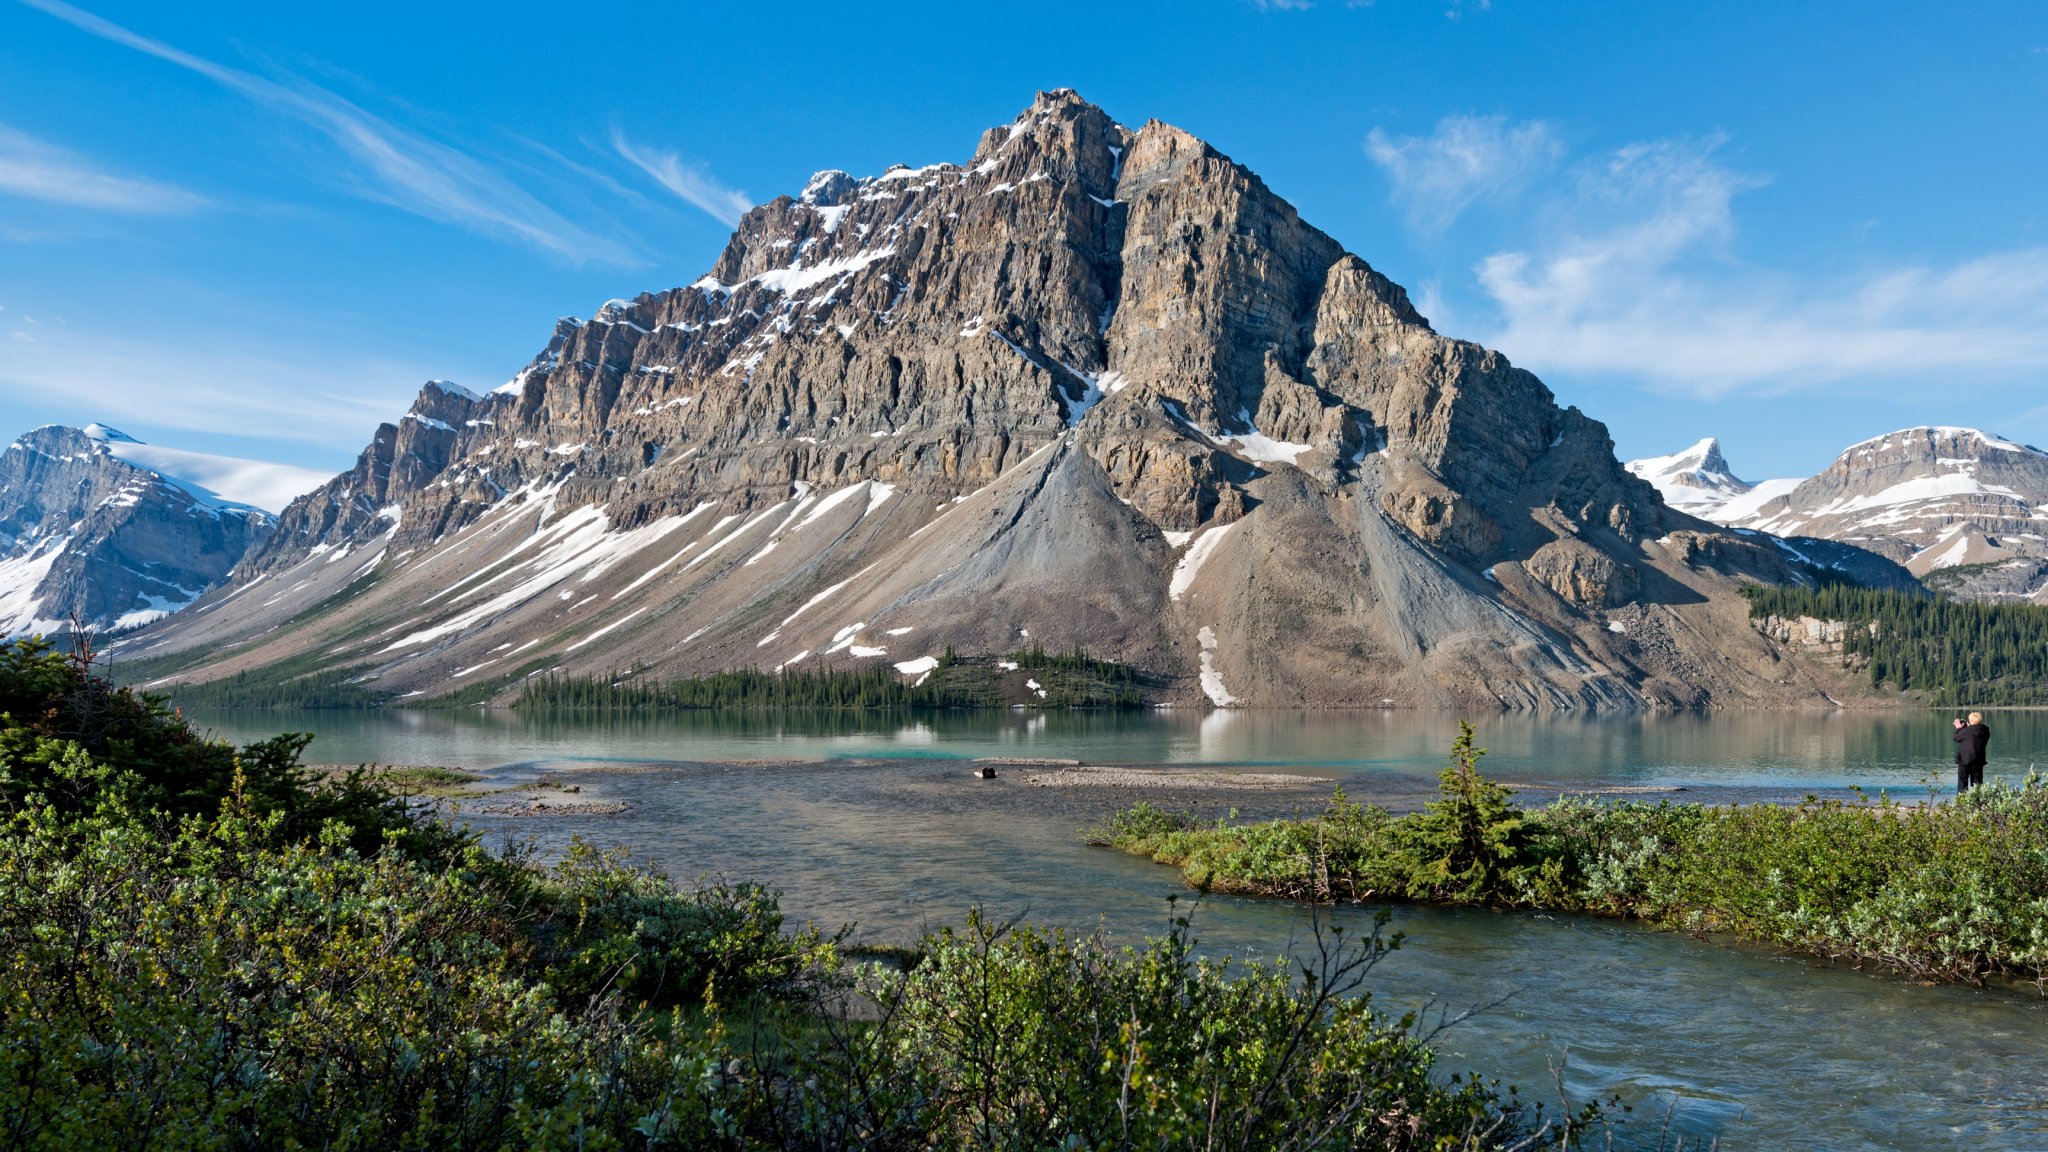 Parks-Canada-Mountains-Scenery-Wallpaper-3456x1944.jpeg